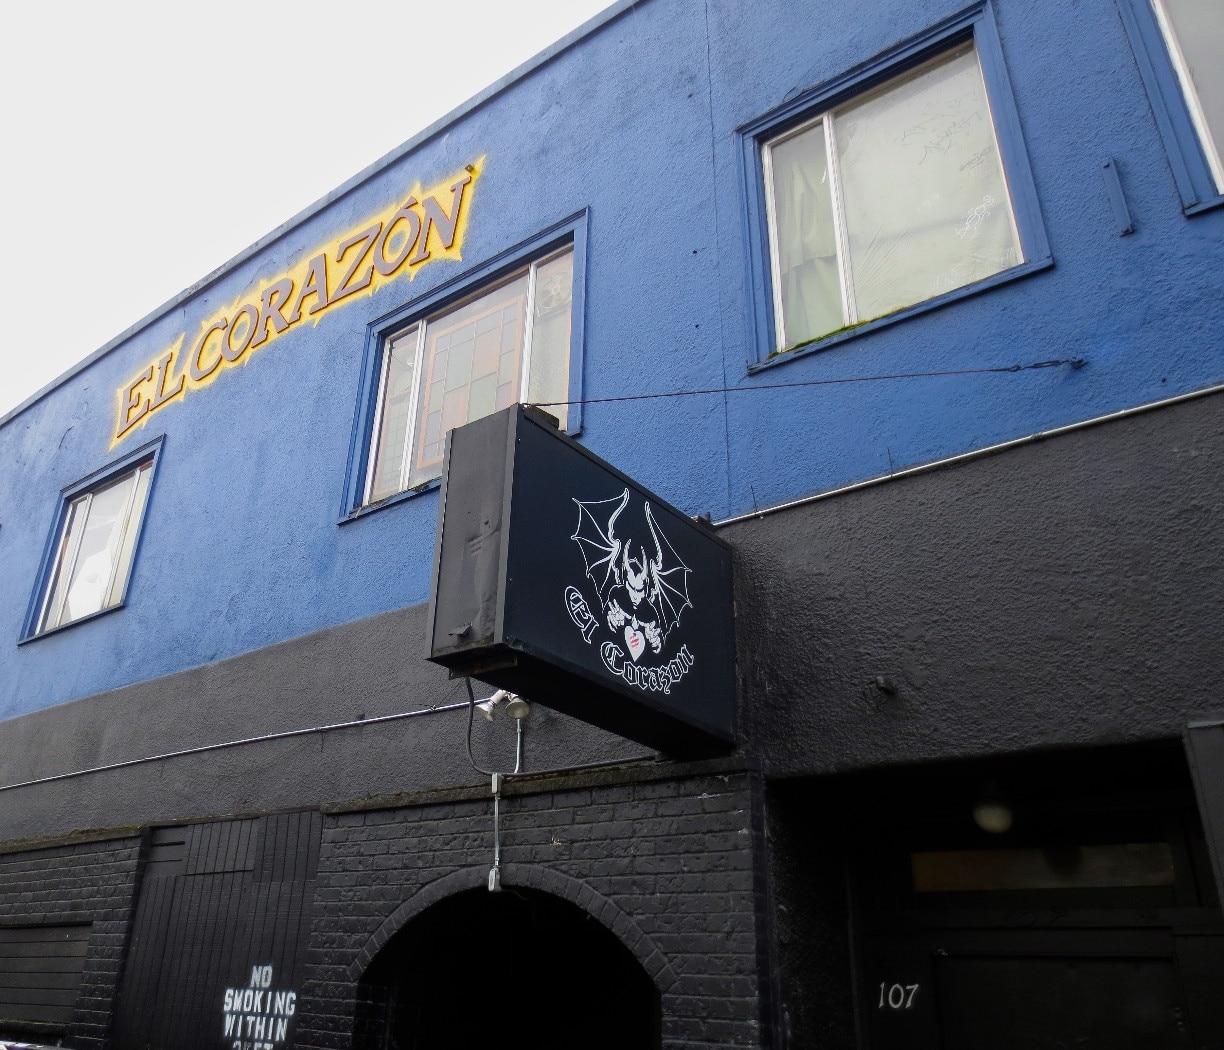 Then known as the “Off Ramp,” this venue (currently another music venue called “El Corazon”) hosted shows by many major bands of the grunge era, such as Nirvana and Mudhoney.